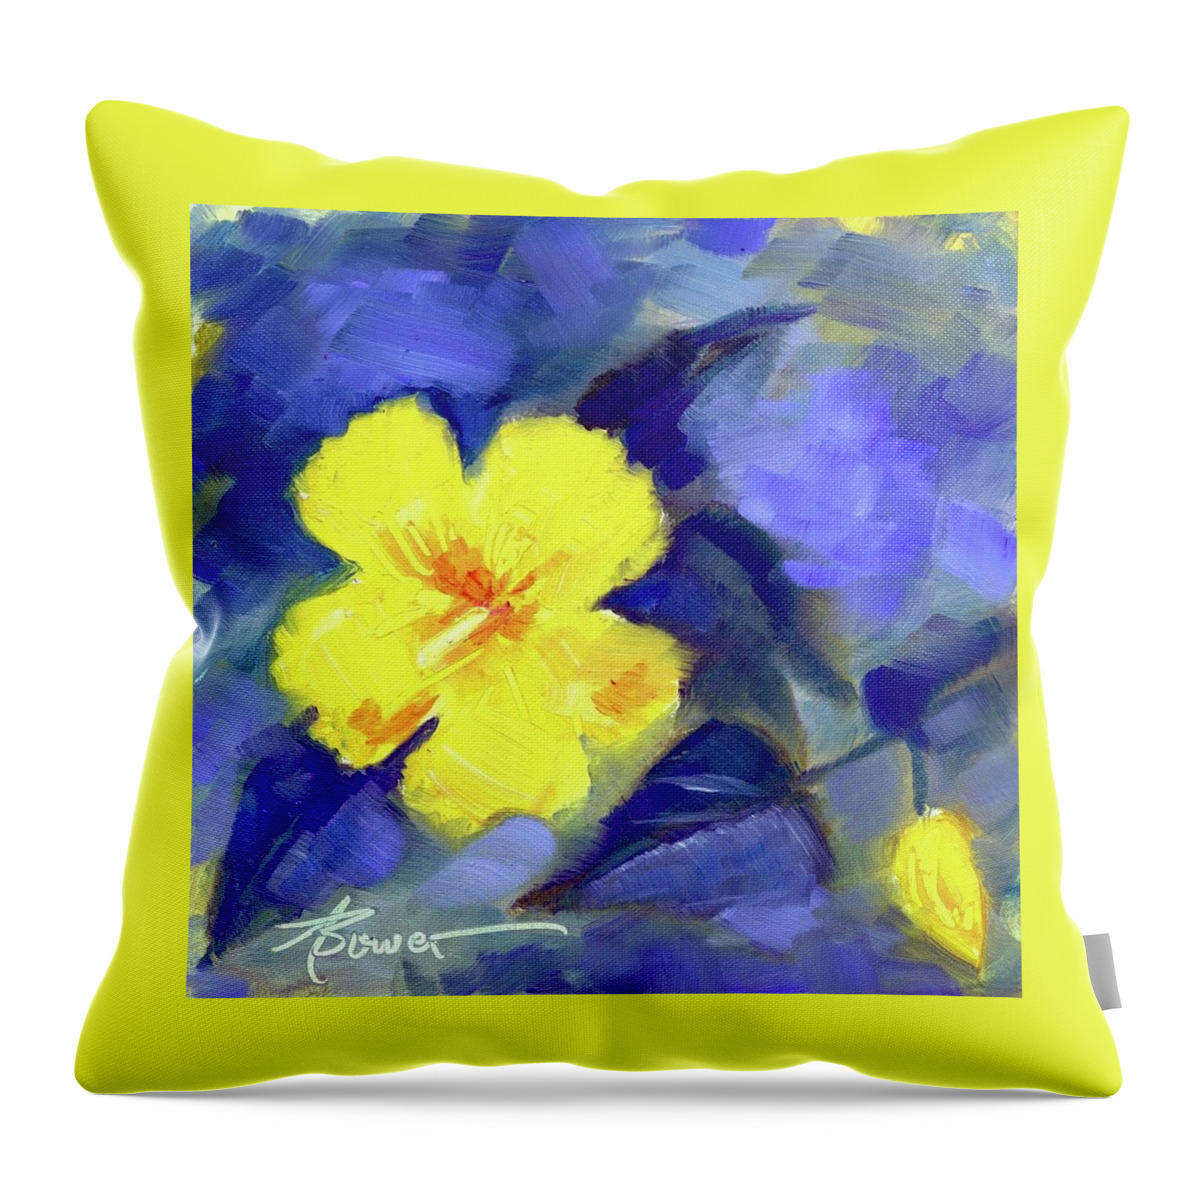 Flowers Throw Pillow featuring the painting Only One Life by Adele Bower